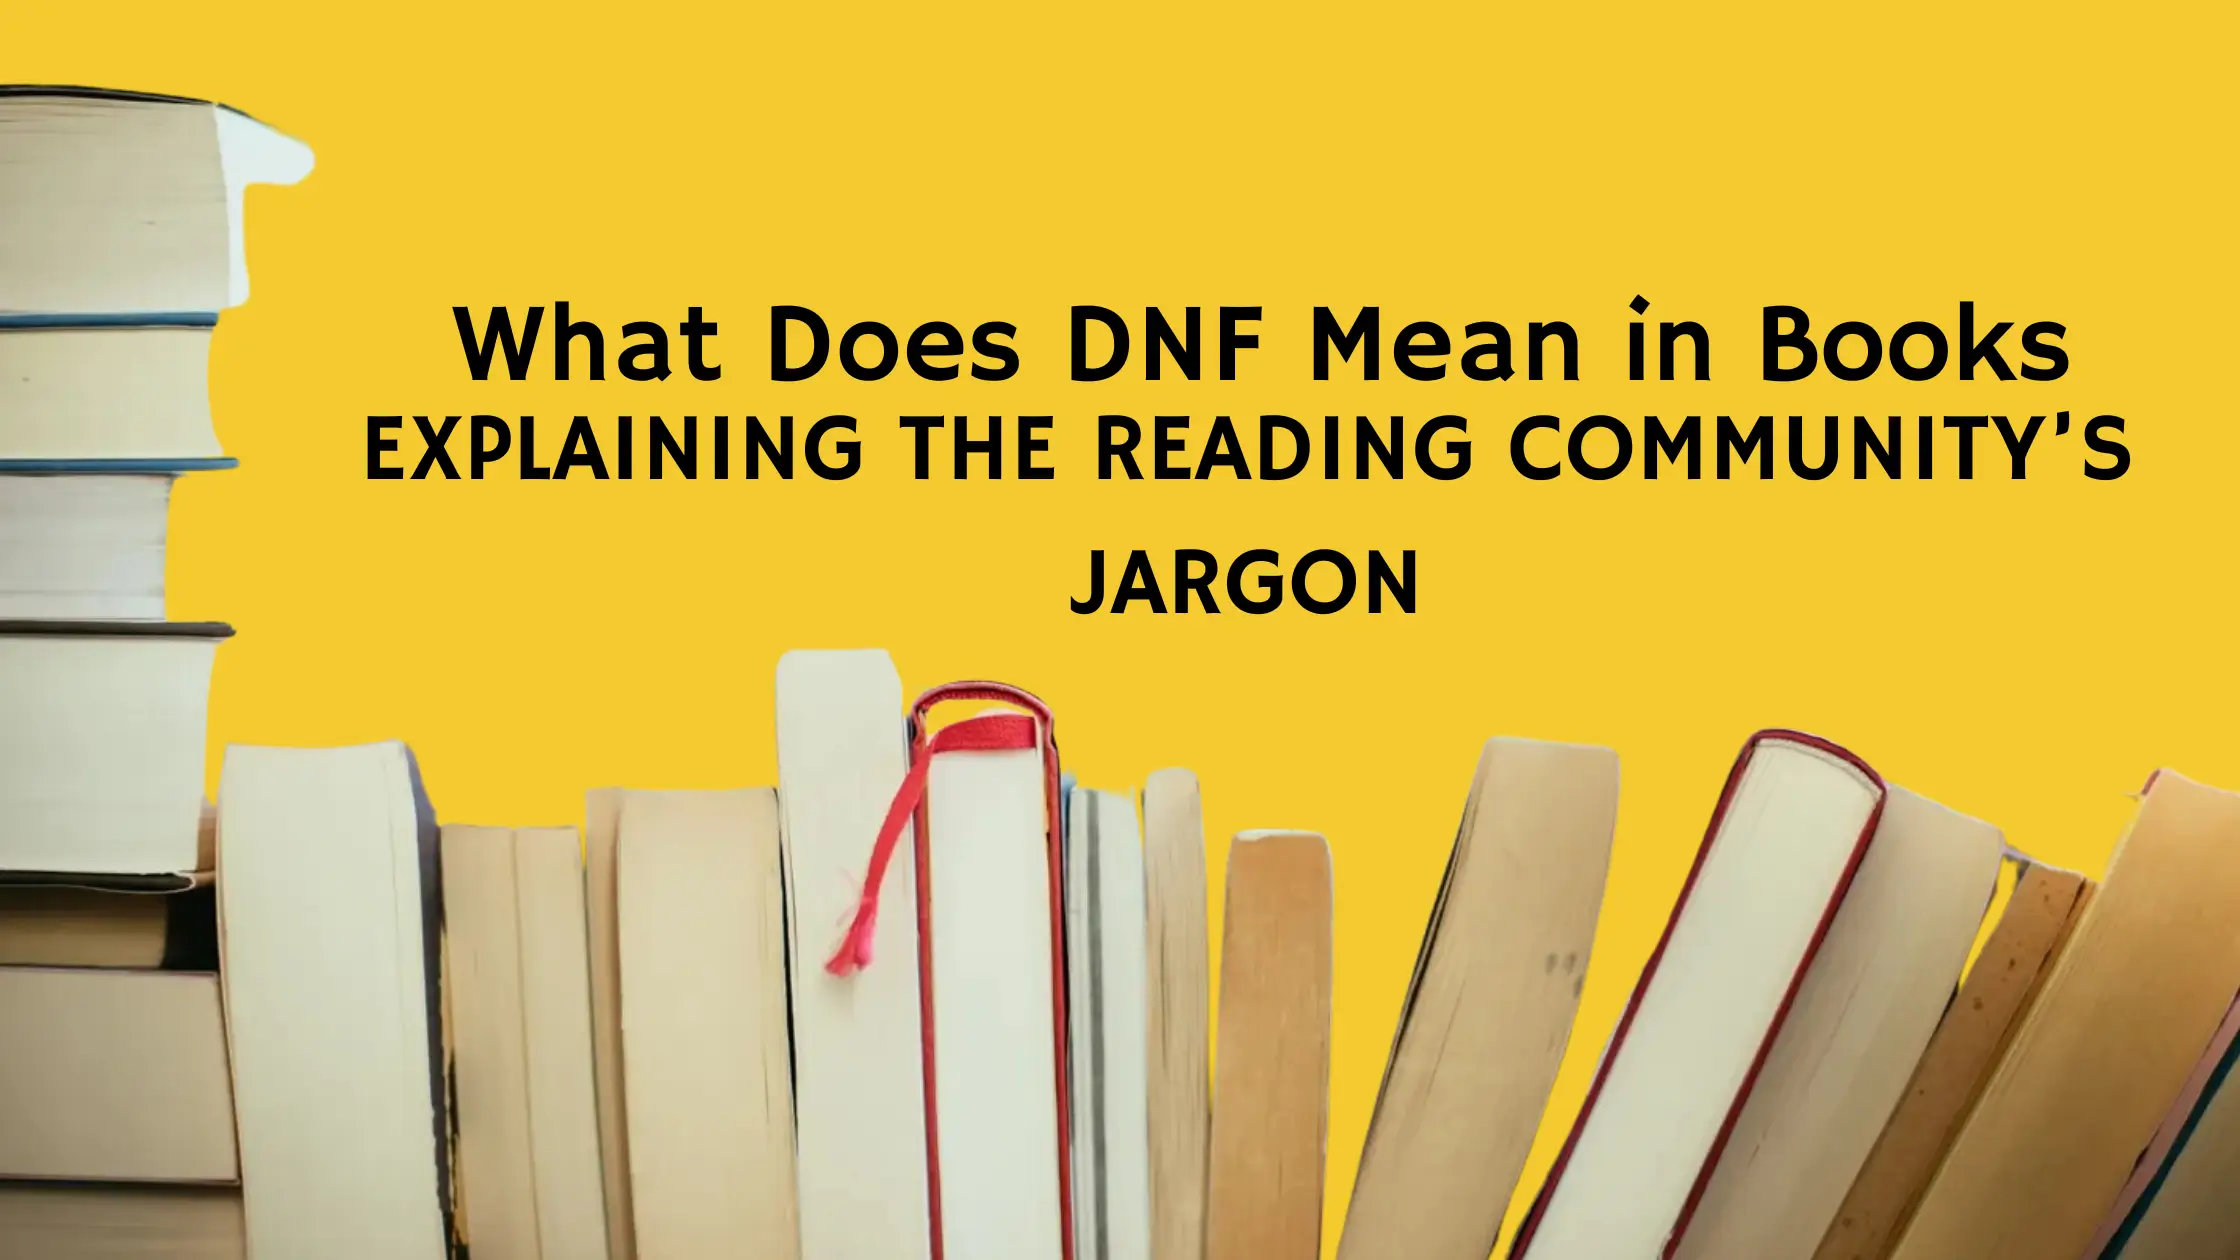 What Does DNF Mean in Books